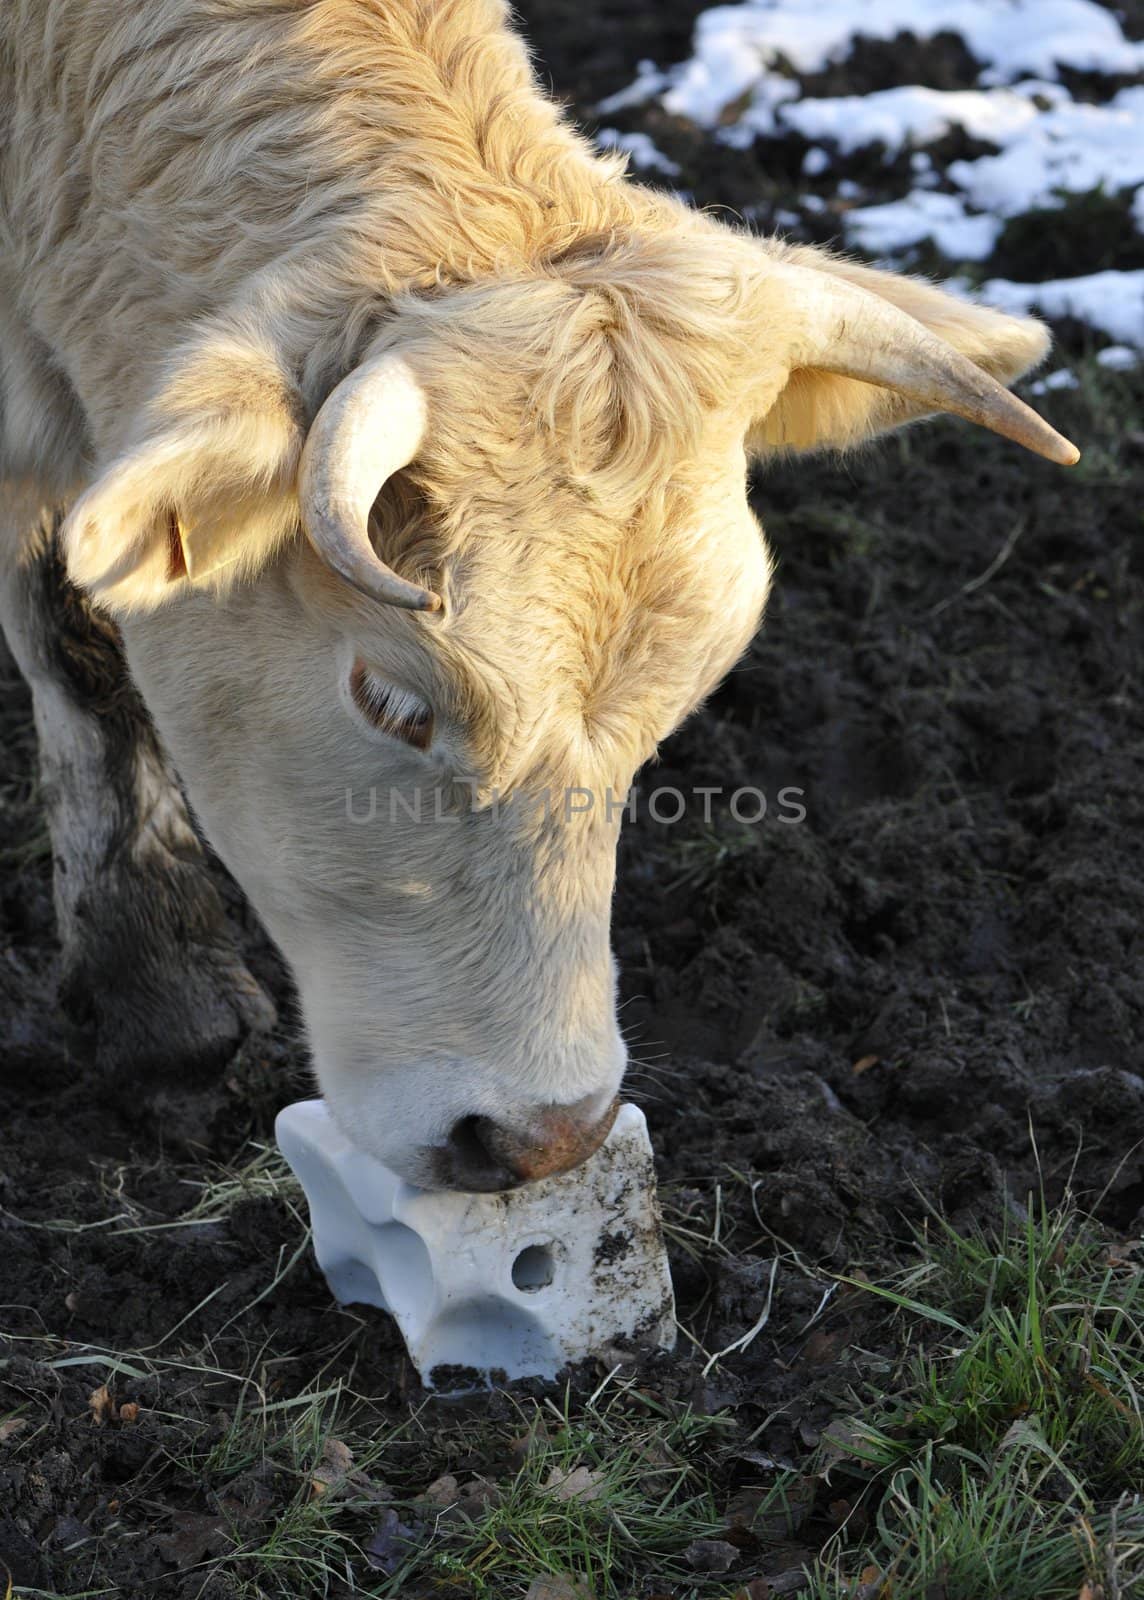 Head cow that licking a block salt on the ground